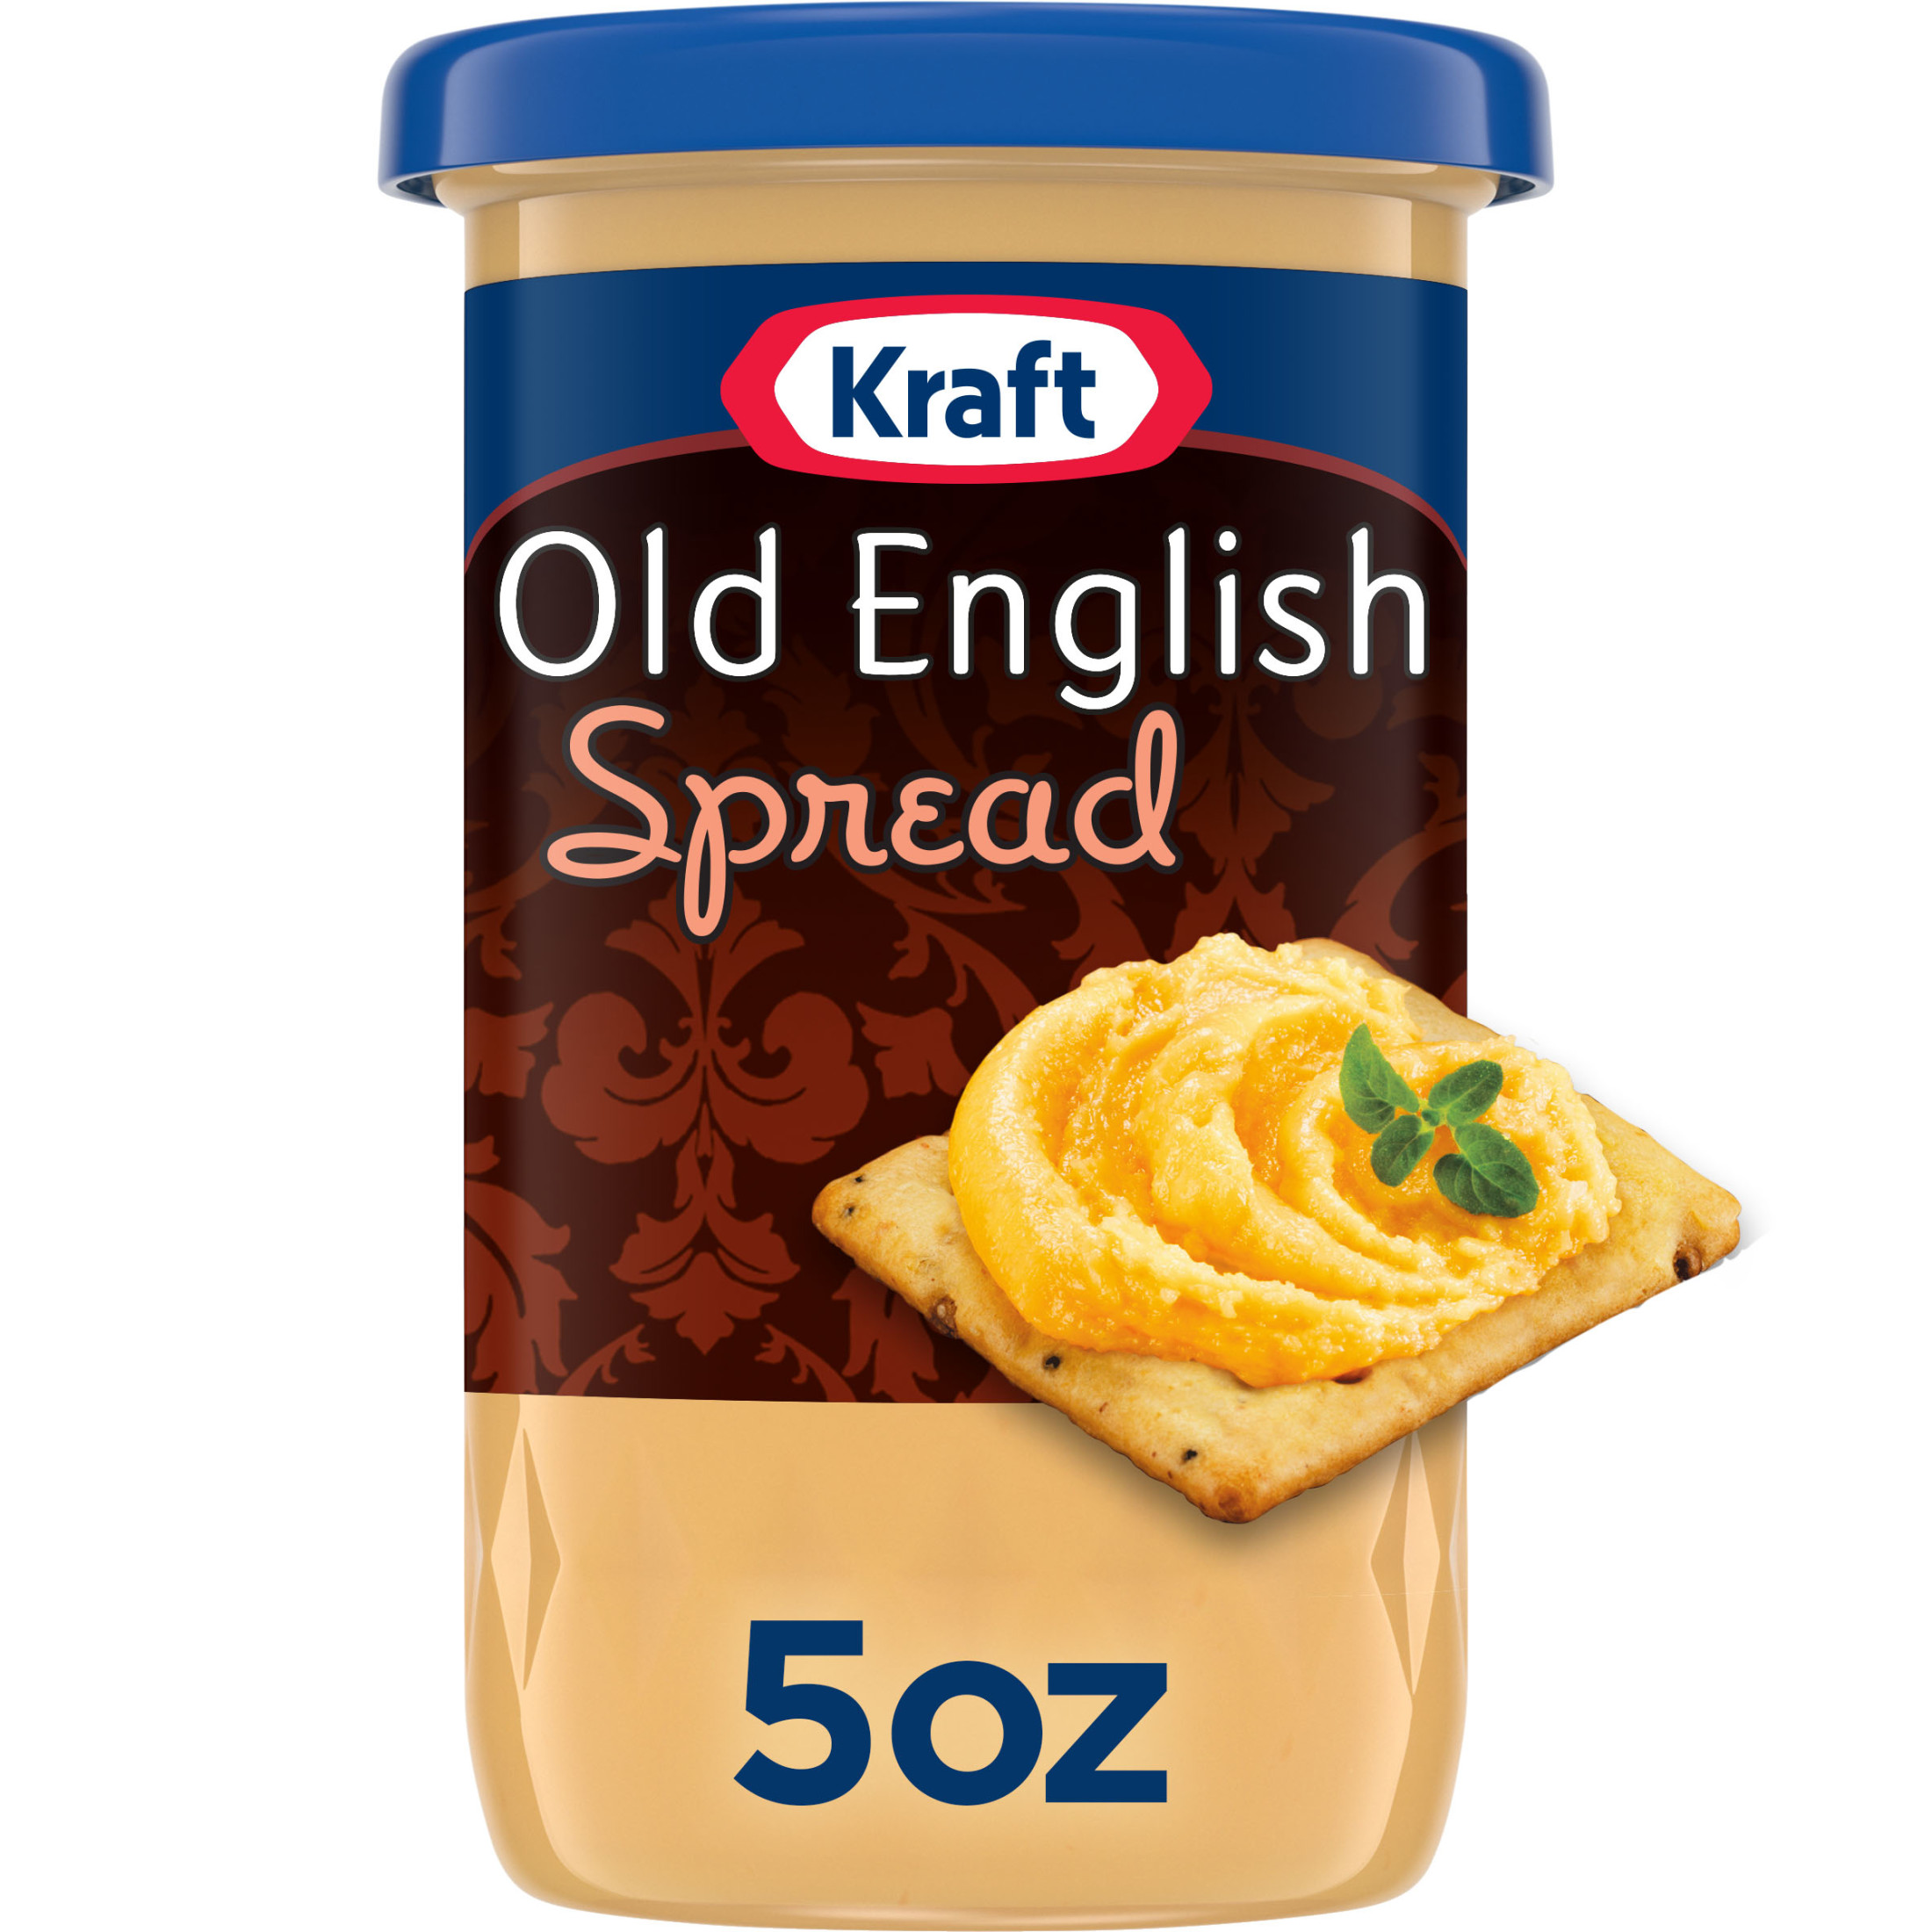 Kraft Old English Pasteurized Process Cheese Spread, 5 oz Jar - image 1 of 11